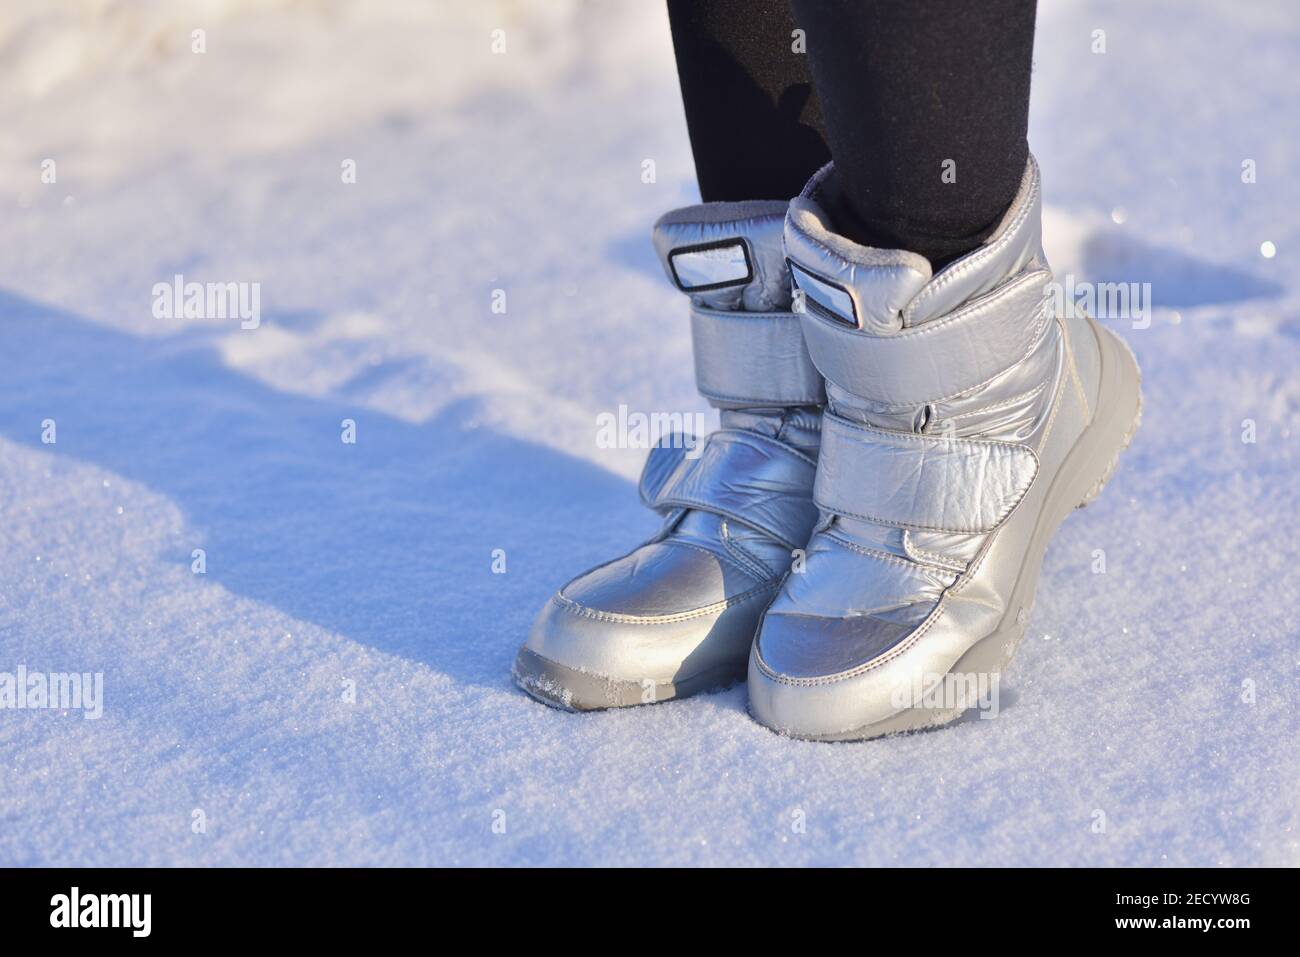 Children's winter boots in silver color on the snow Stock Photo